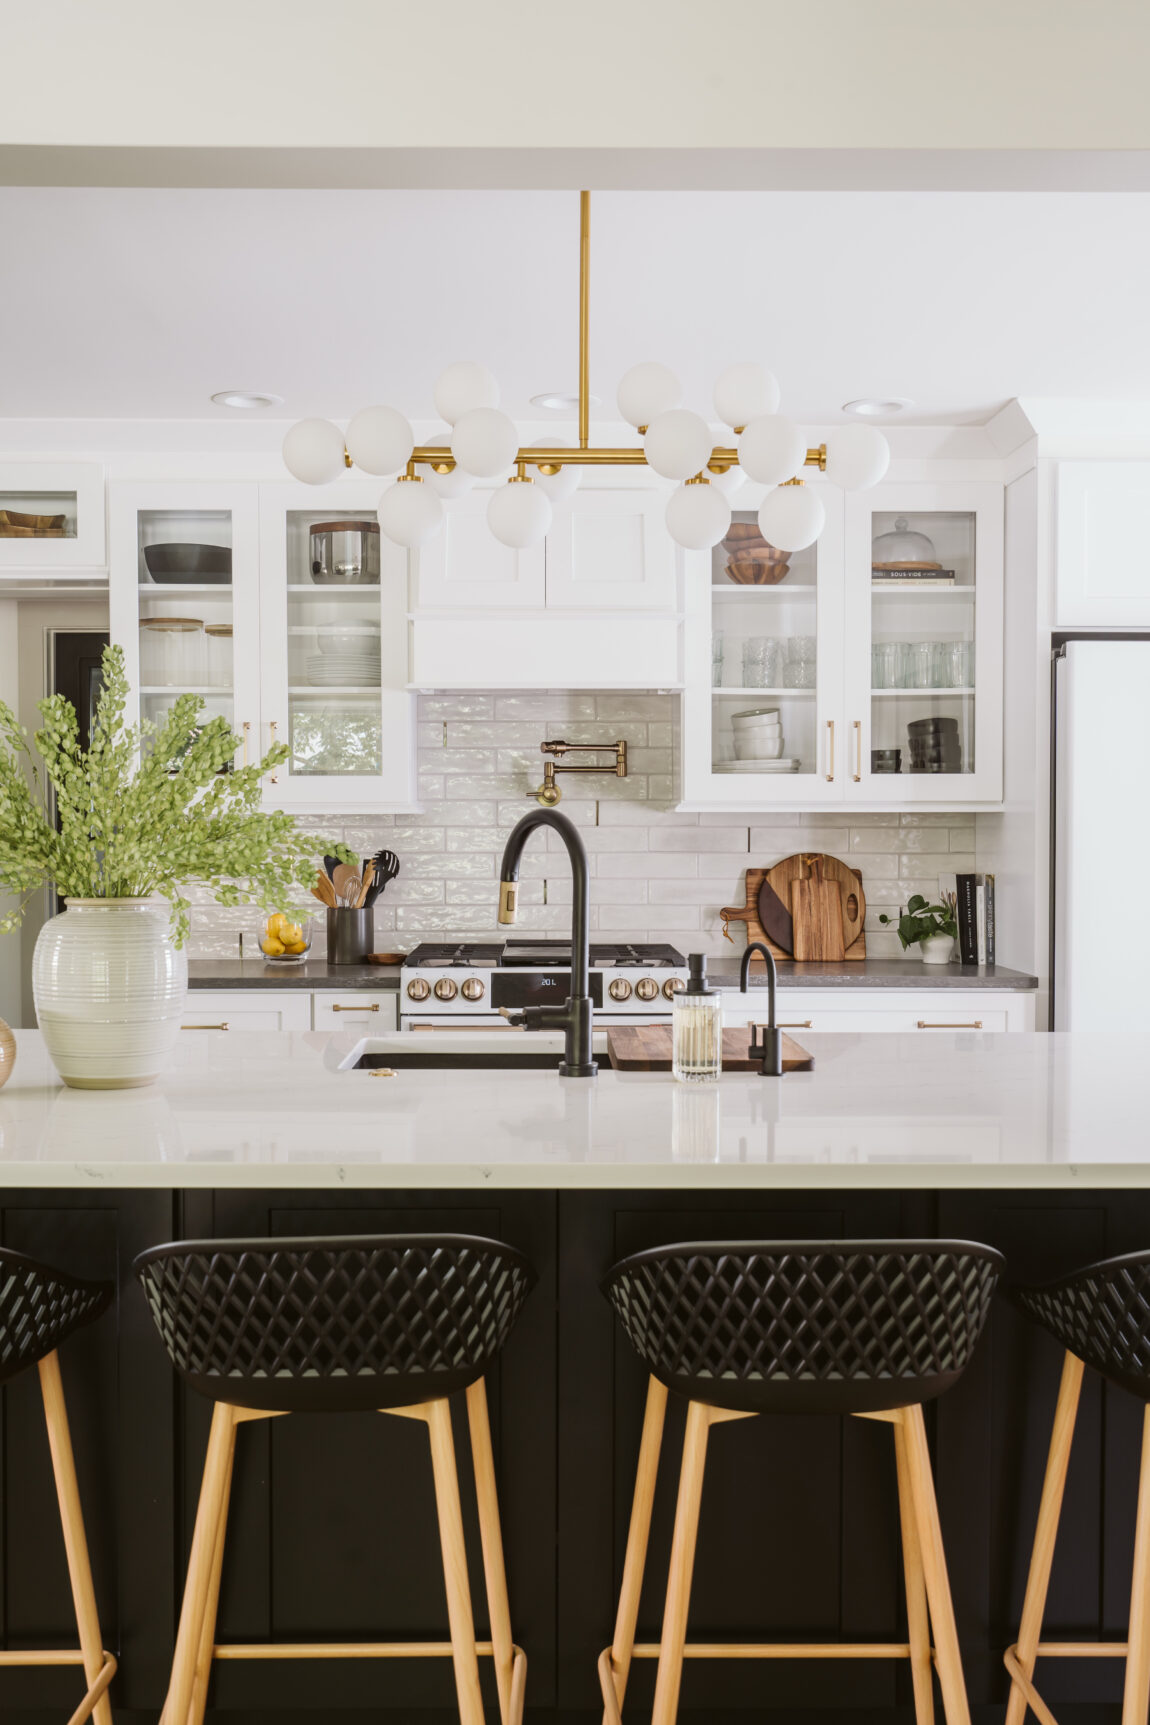 HOW TO STYLE GLASS FRONT KITCHEN CABINETS - CLARK + ALDINE